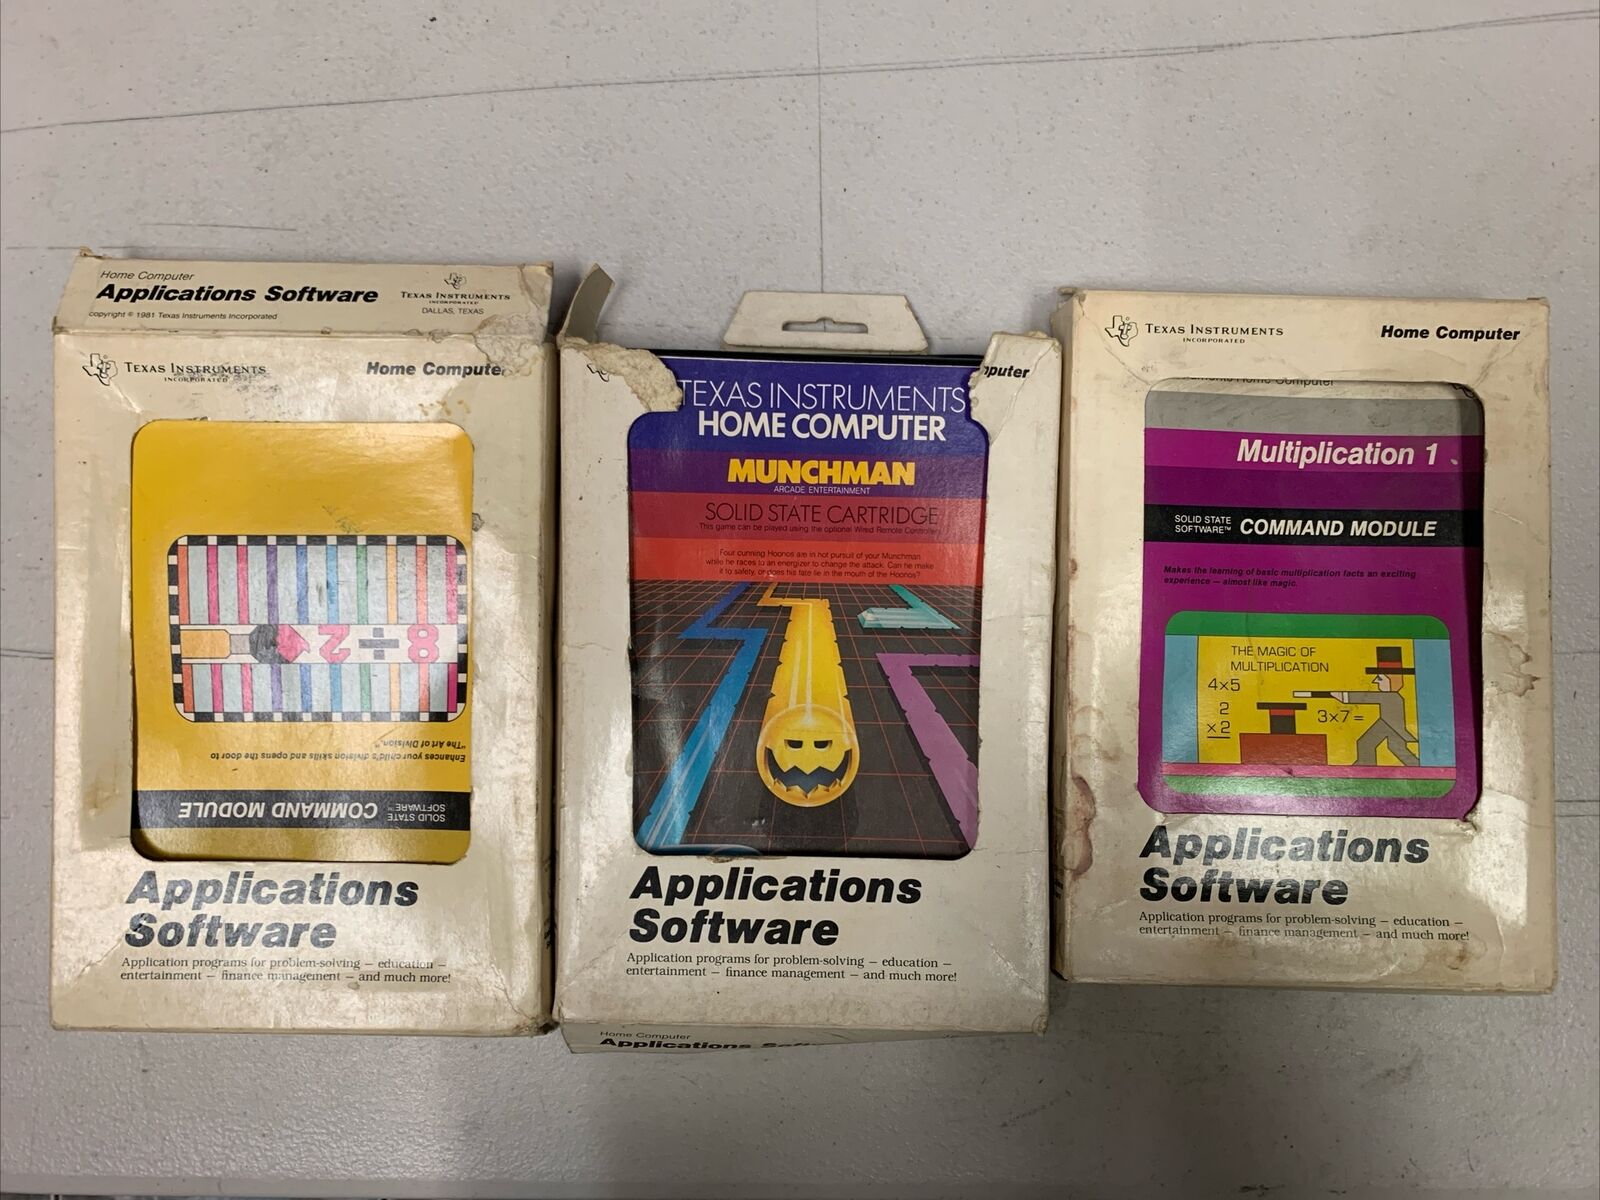 LOT OF 3 Texas Instruments Home Computer Applications Software